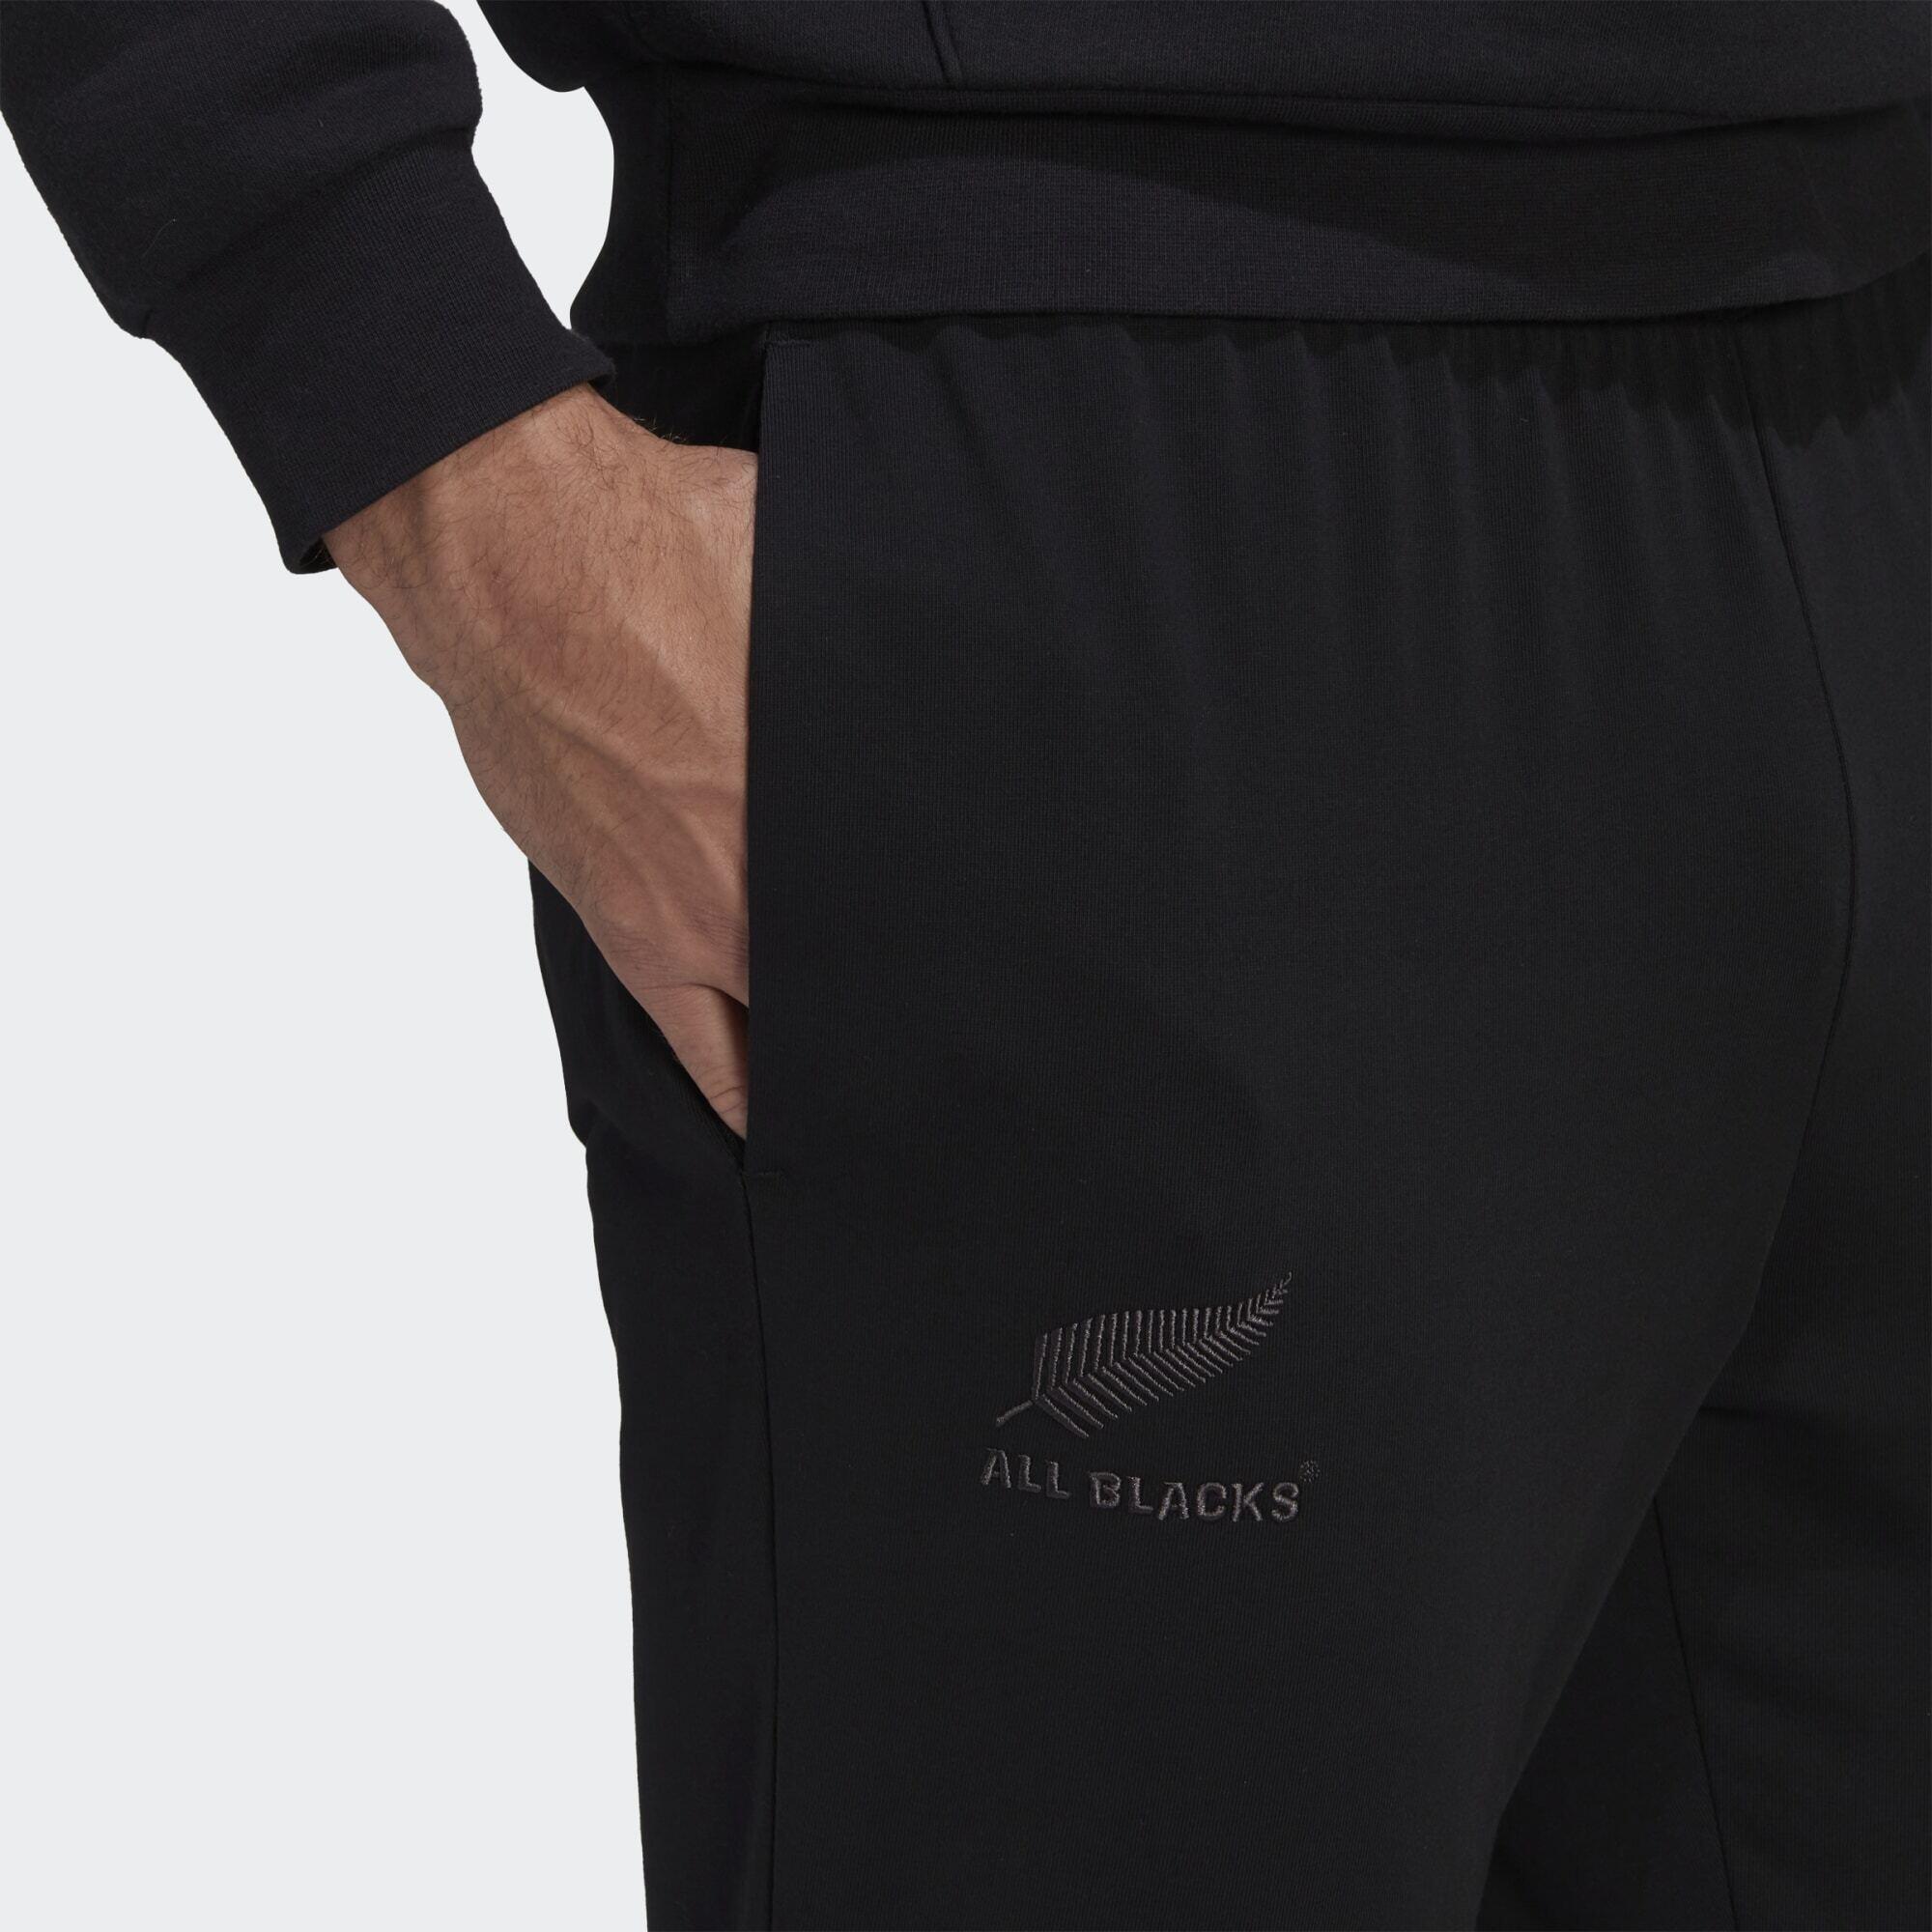 All Blacks Lifestyle Tapered Cuff Pants 4/5